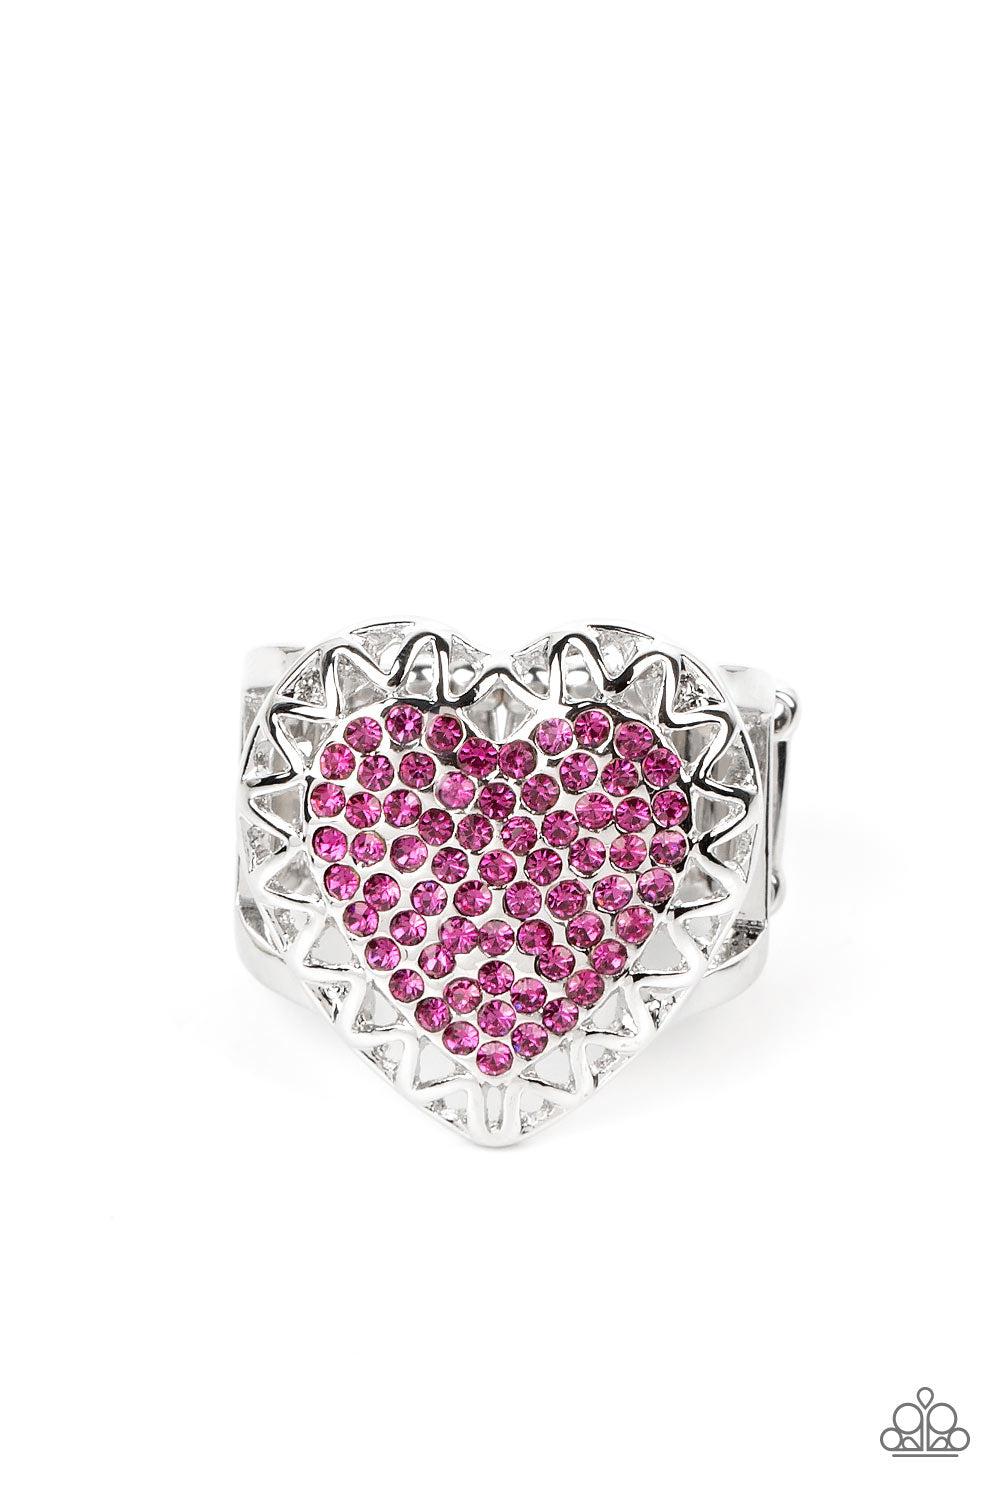 Romantic Escape Pink Rhinestone Heart Ring - Paparazzi Accessories- lightbox - CarasShop.com - $5 Jewelry by Cara Jewels